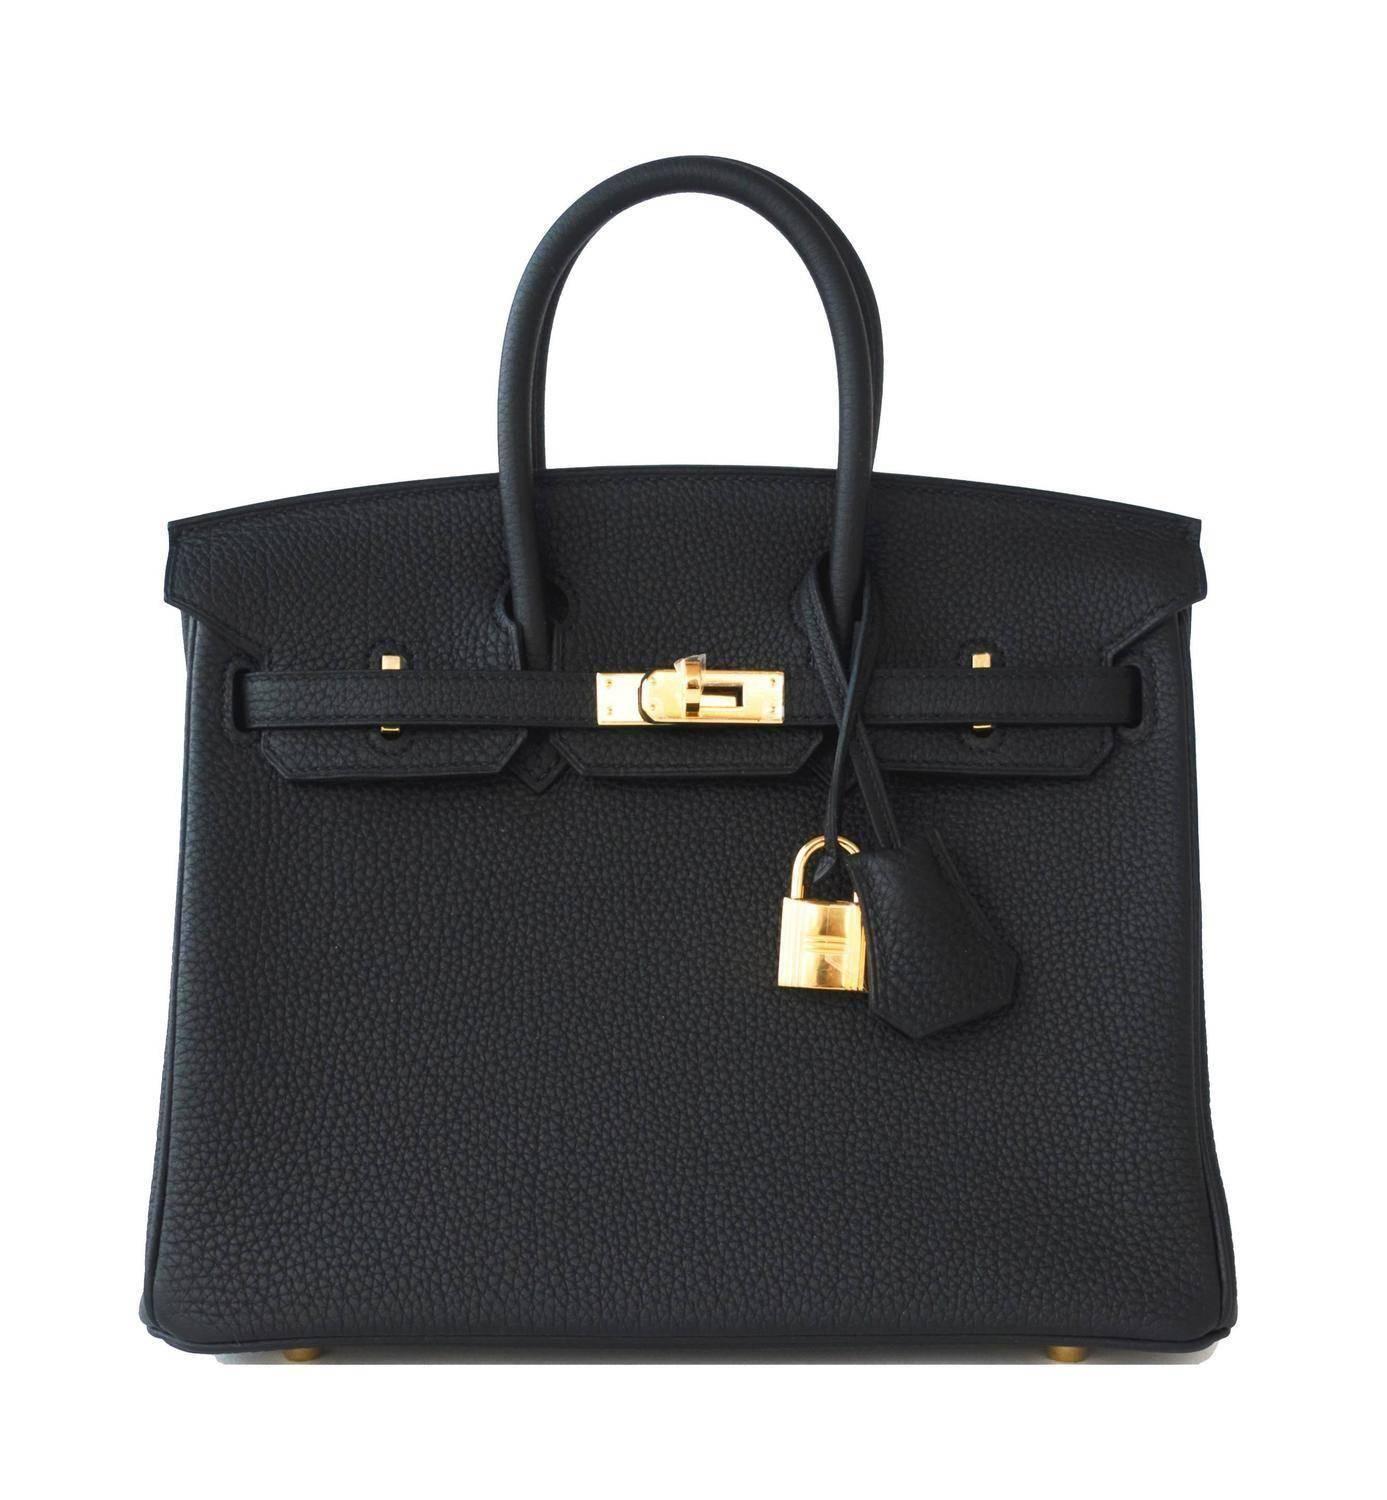 Hermes Black Baby Birkin 25cm Togo Gold GHW Satchel Jewel
Brand New in Box. Store Fresh.
Perfect gift! Comes full set with keys, lock, clochette, a sleeper for the bag, rain protector, and Hermes box
As seen on so many celebs and socialites-